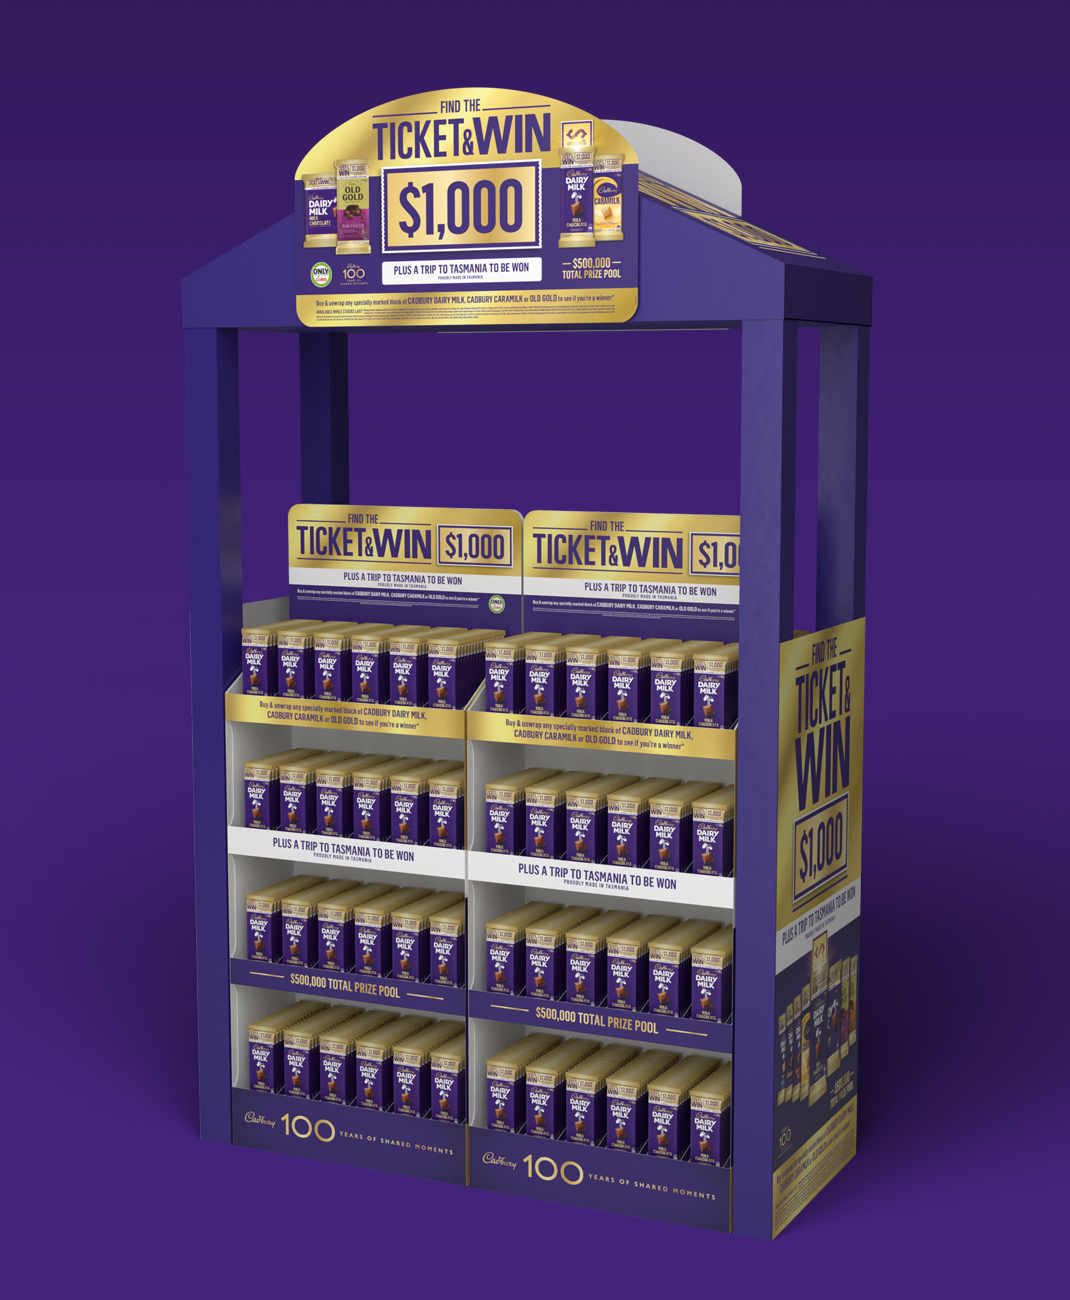 Cadbury Find the Ticket Promotion off location tower with multiple blocks of promotional chocolate